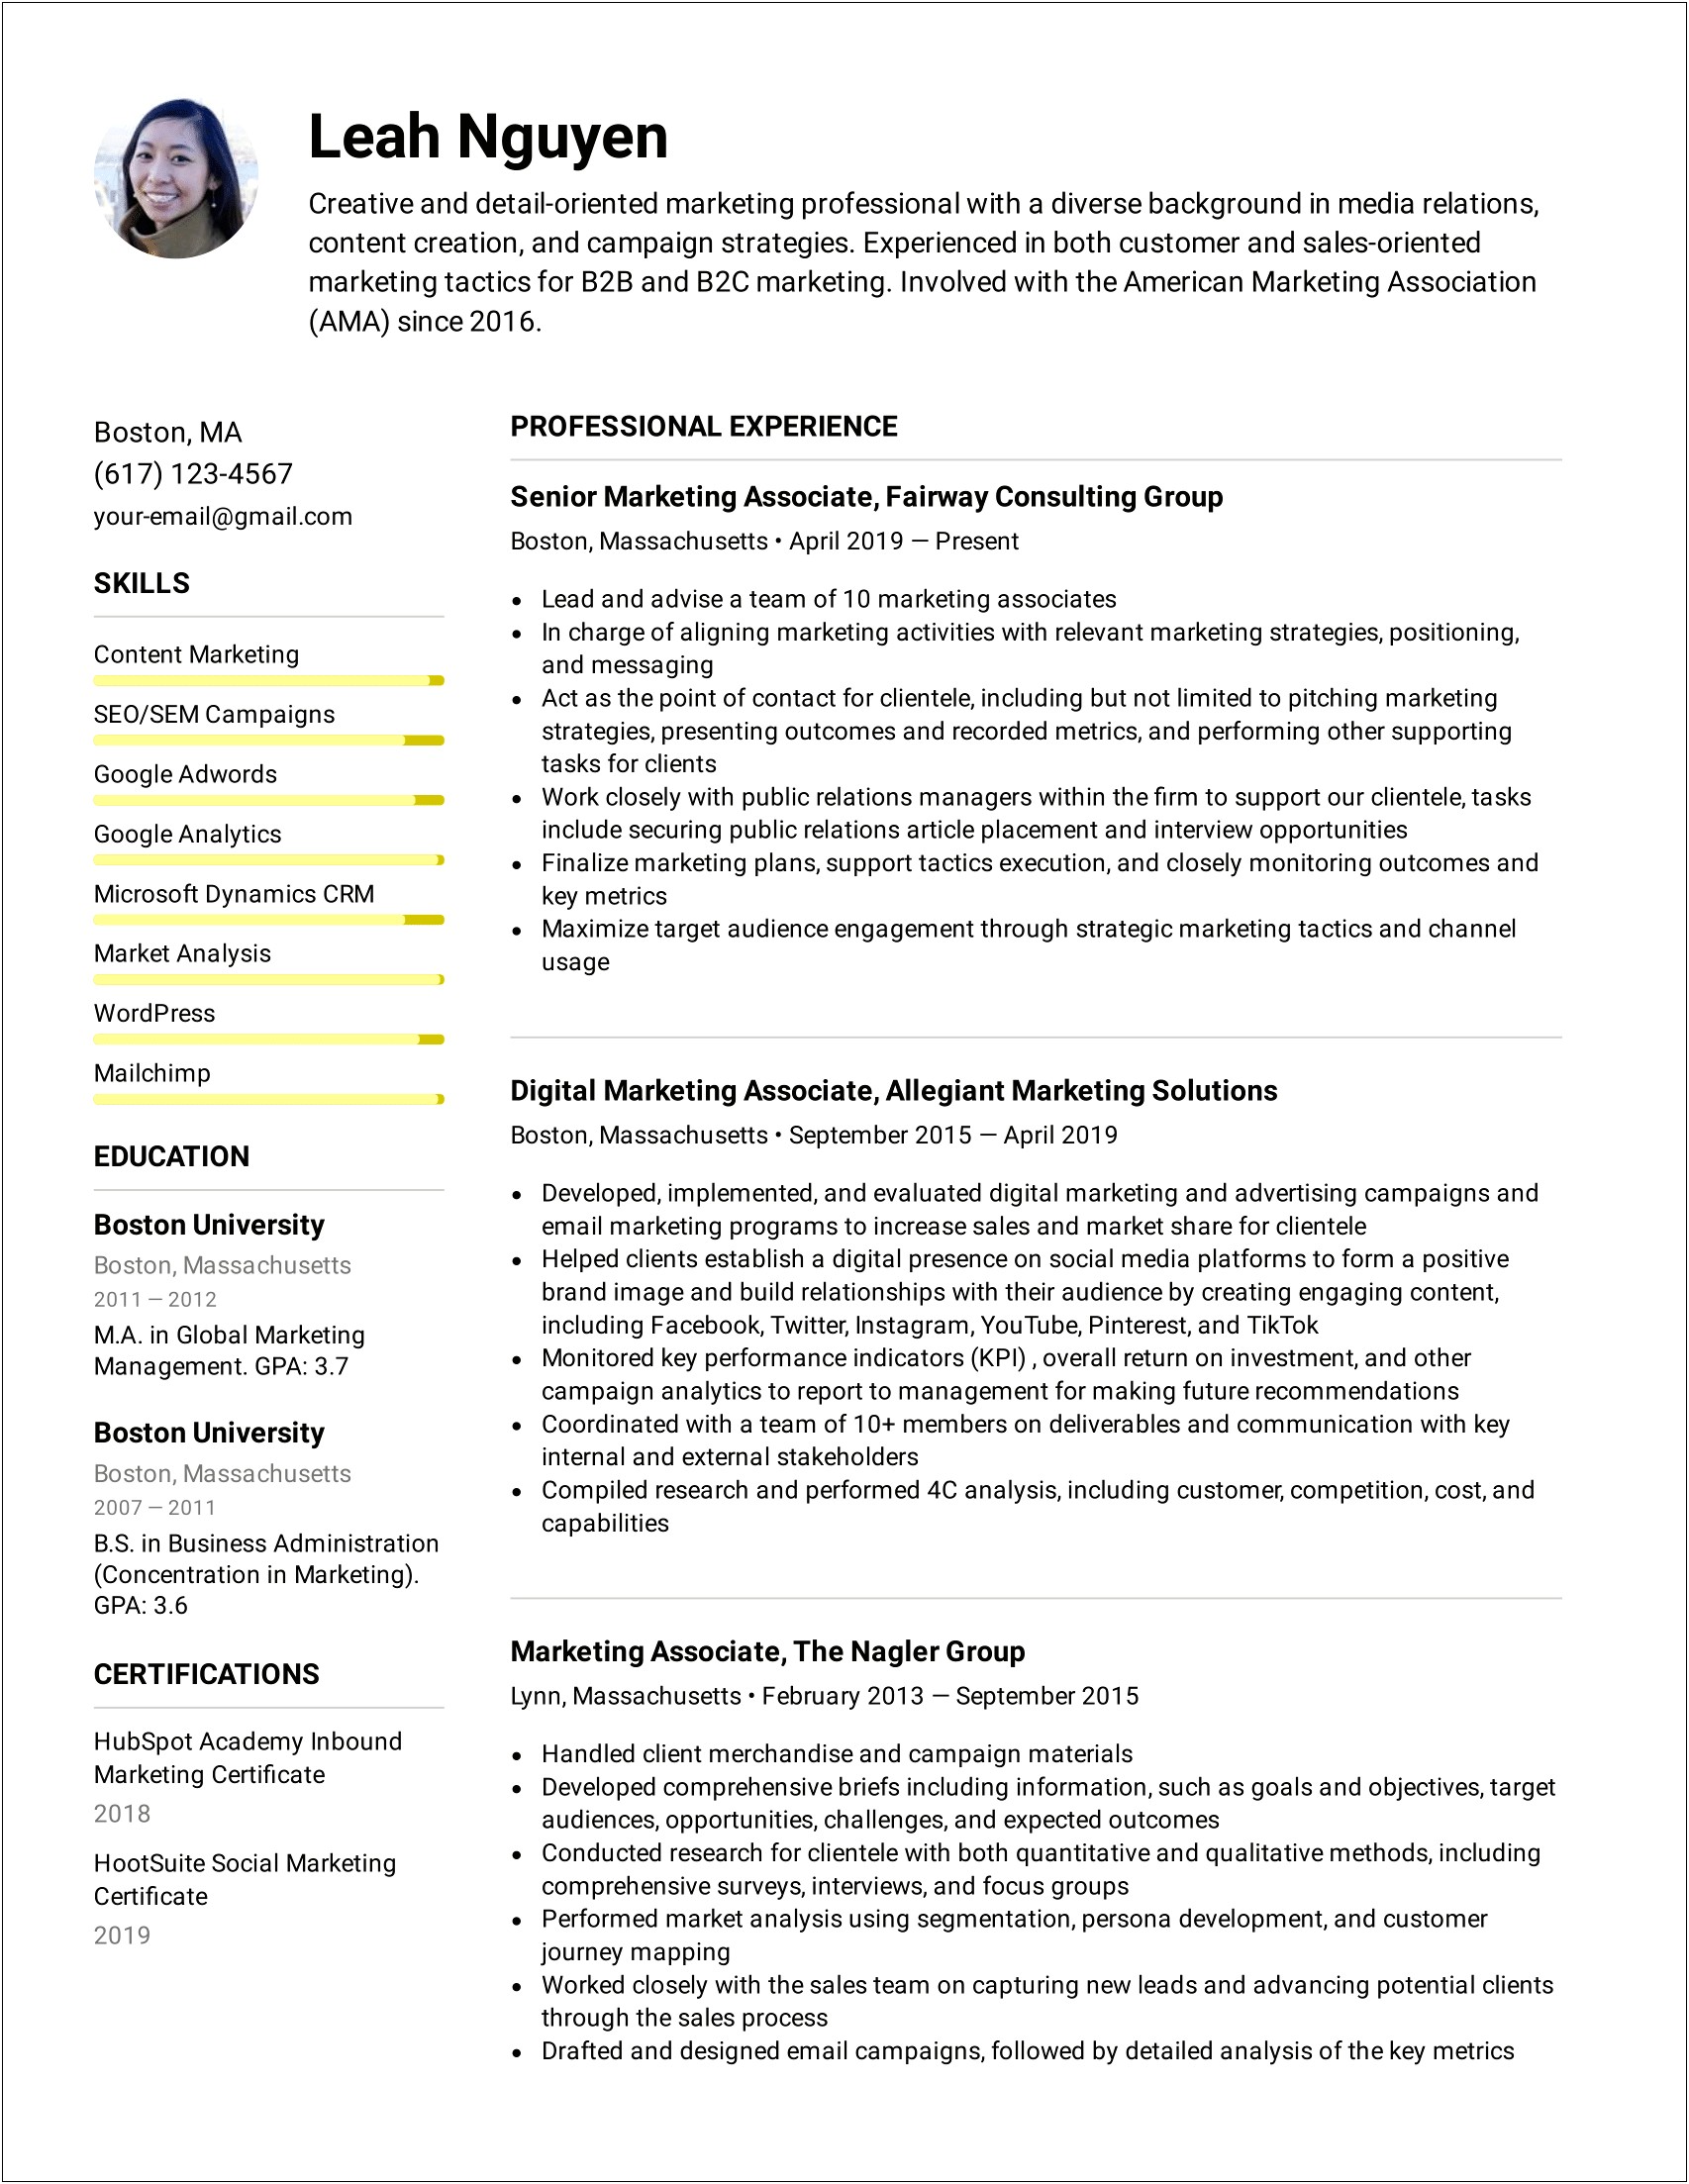 Paid Ads Marketer Resume Example